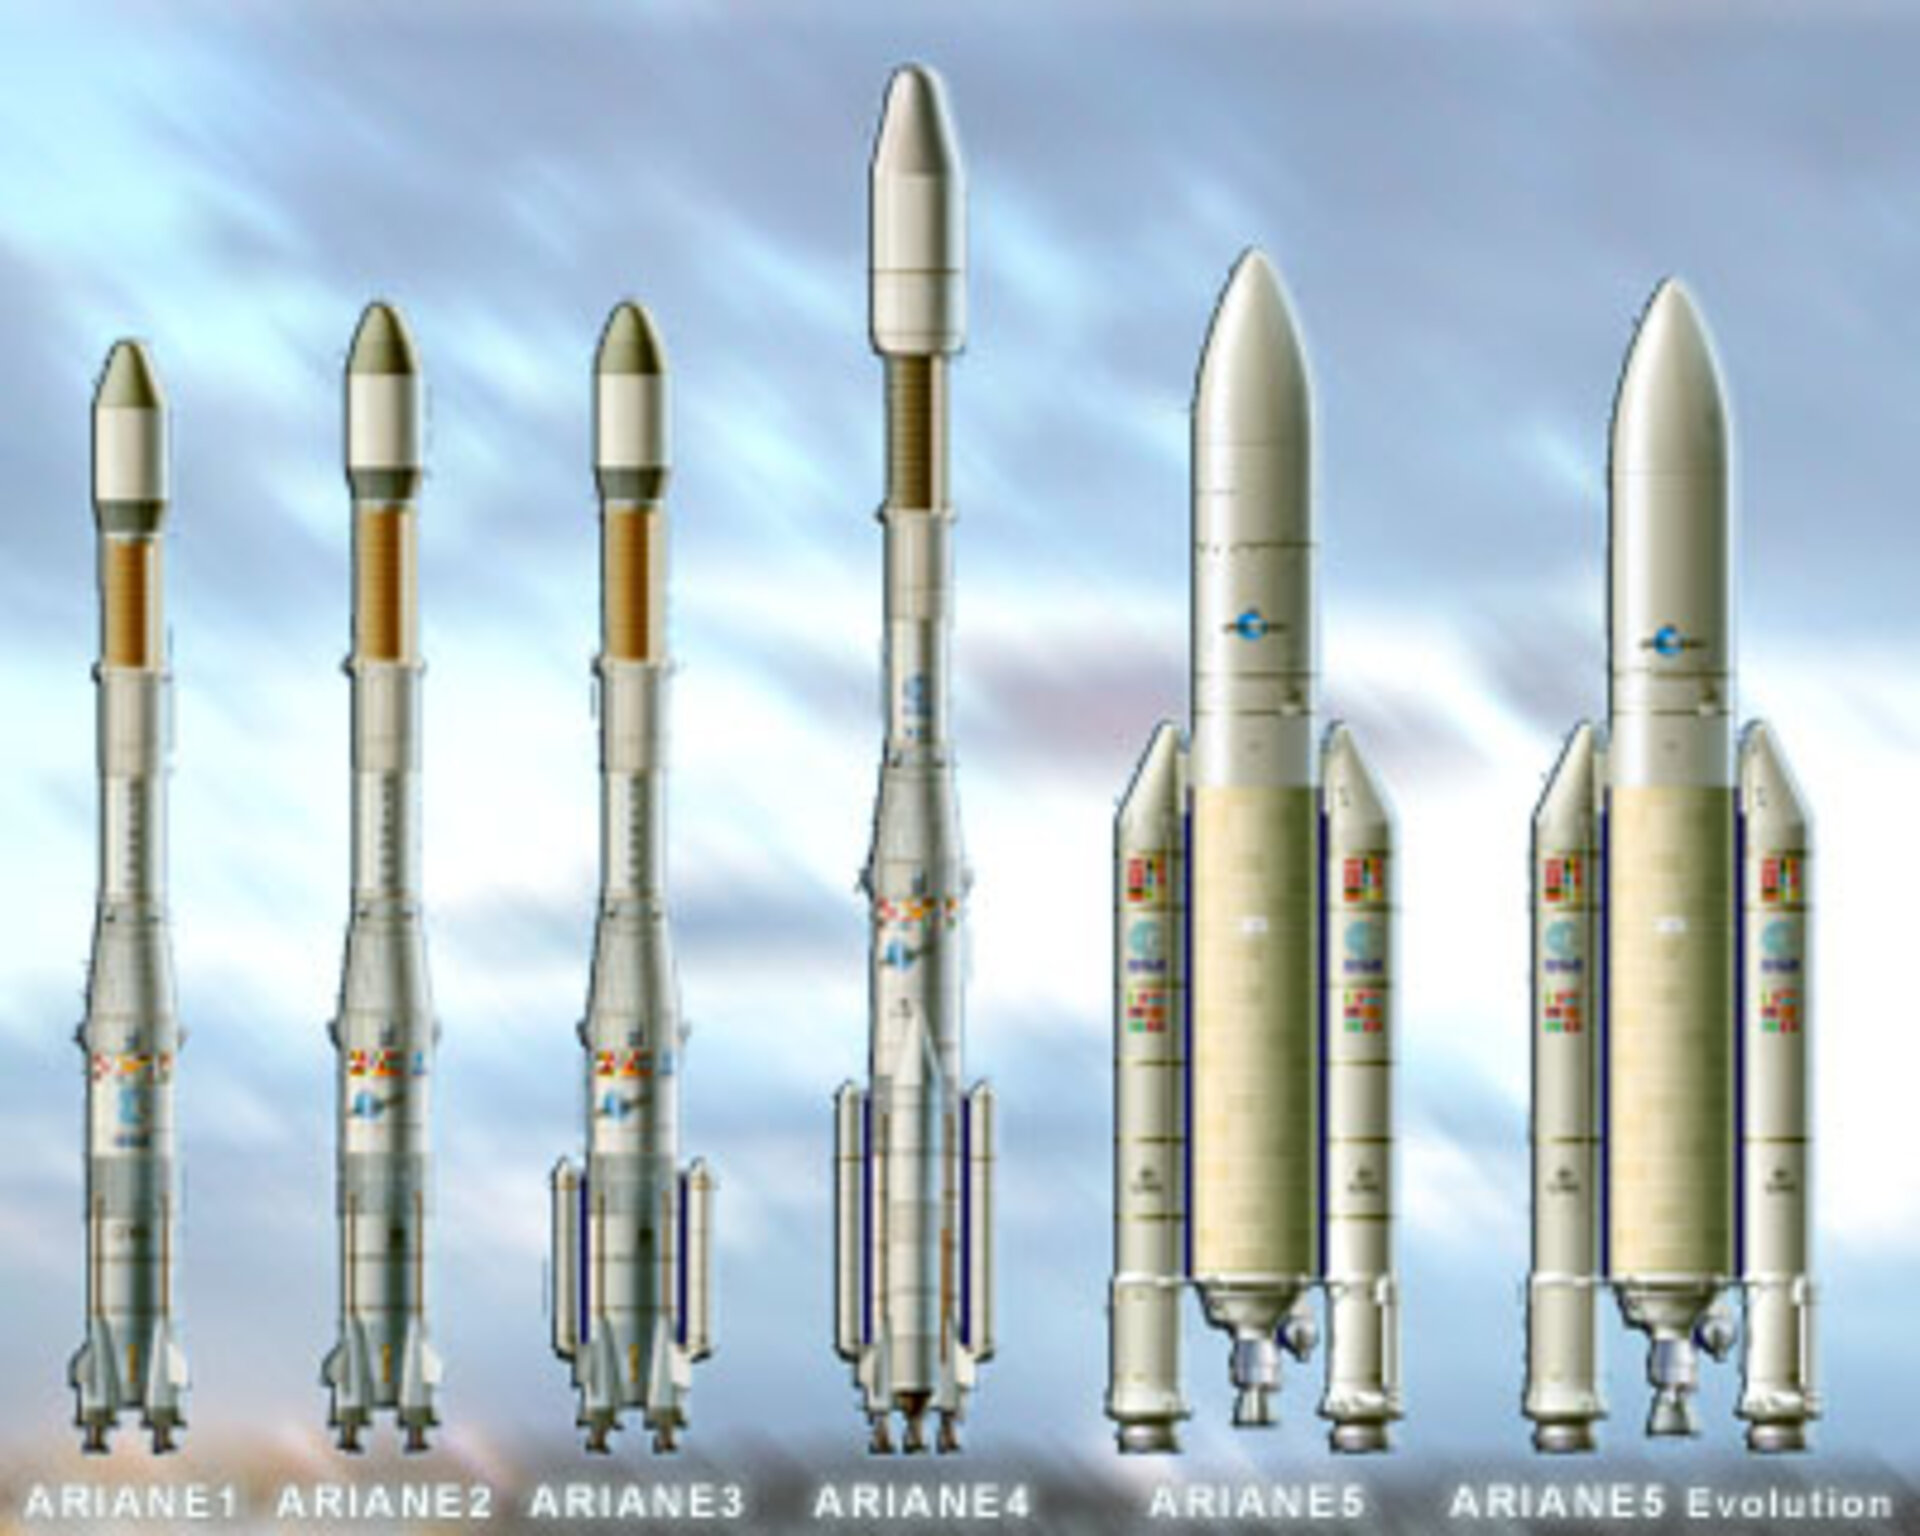 The Ariane launcher family artist view